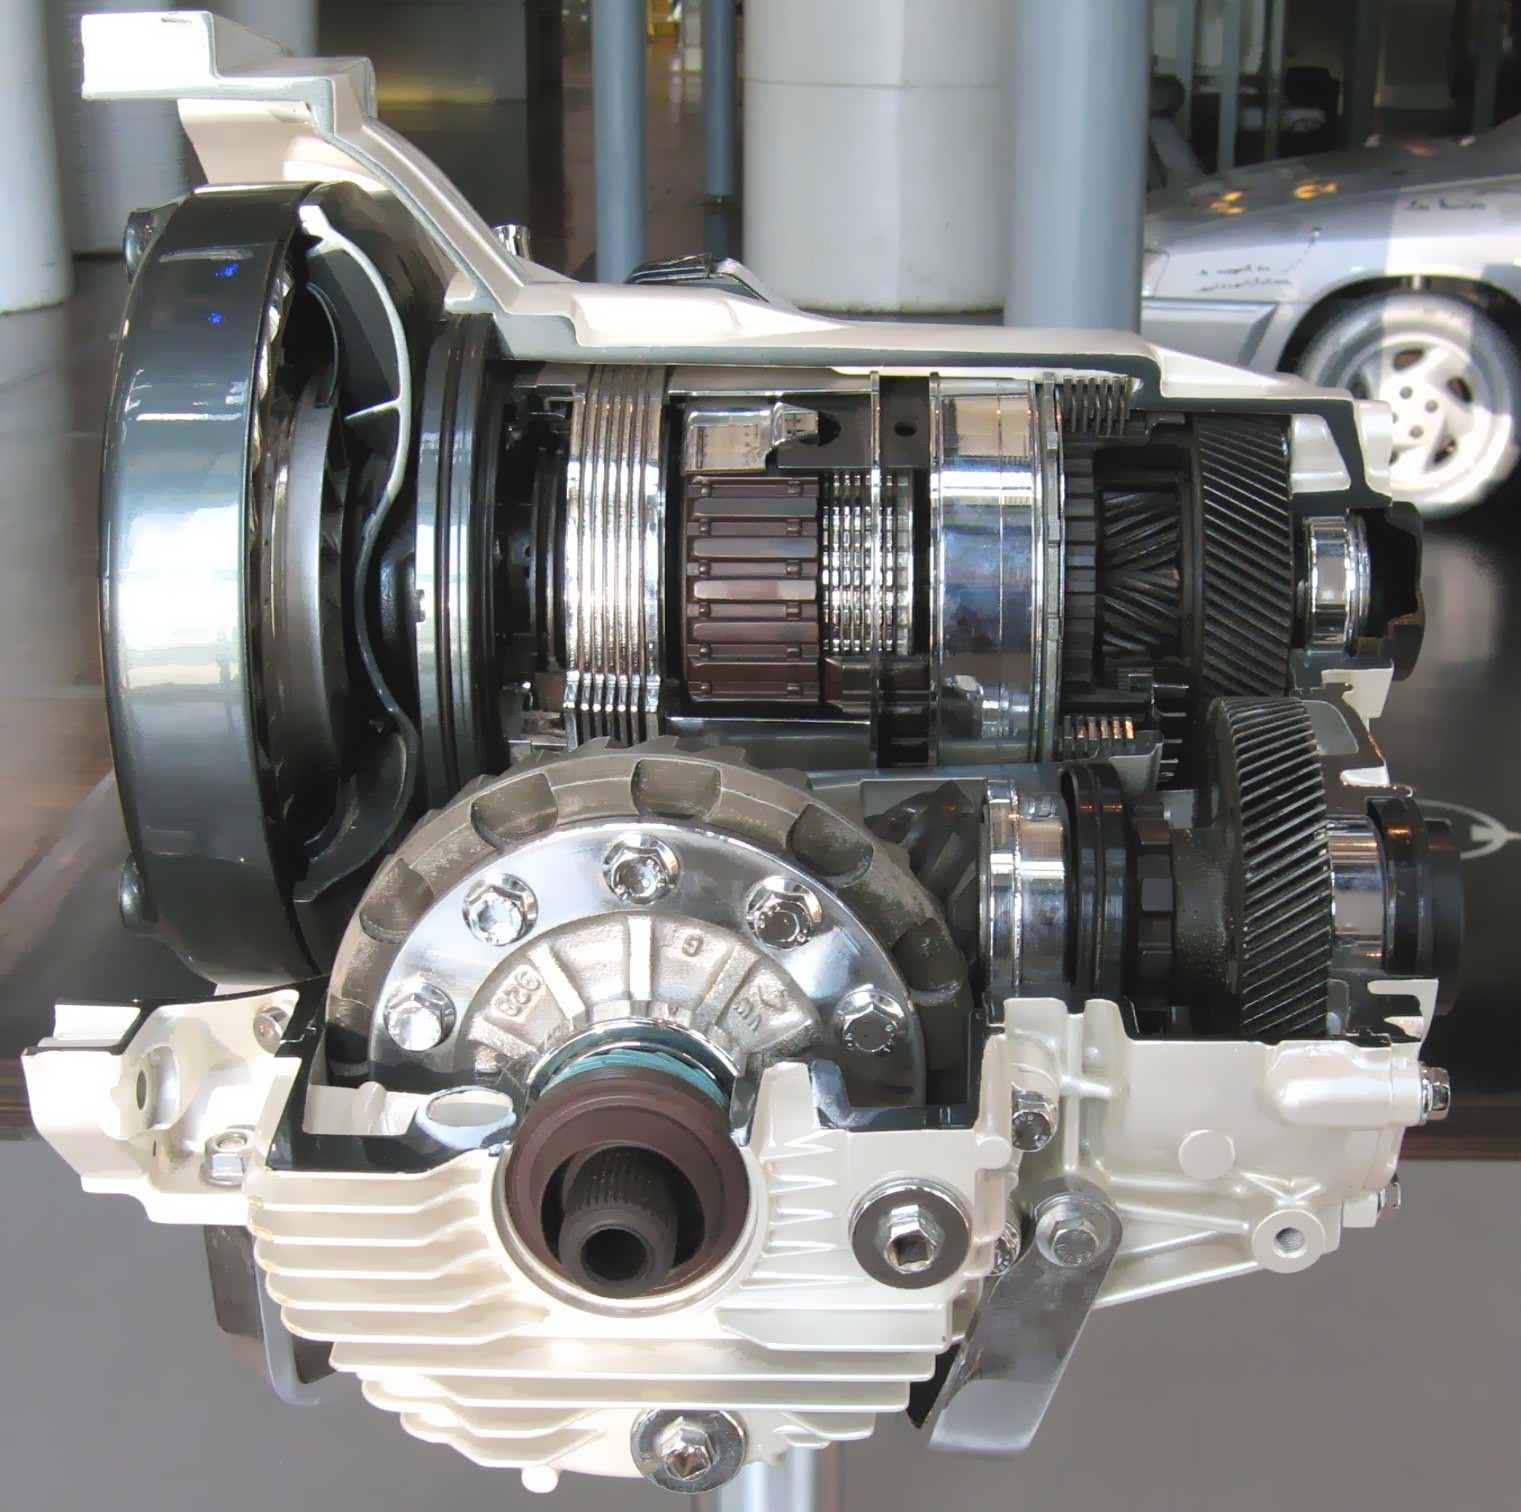 How to Successfully Repair a Gearbox